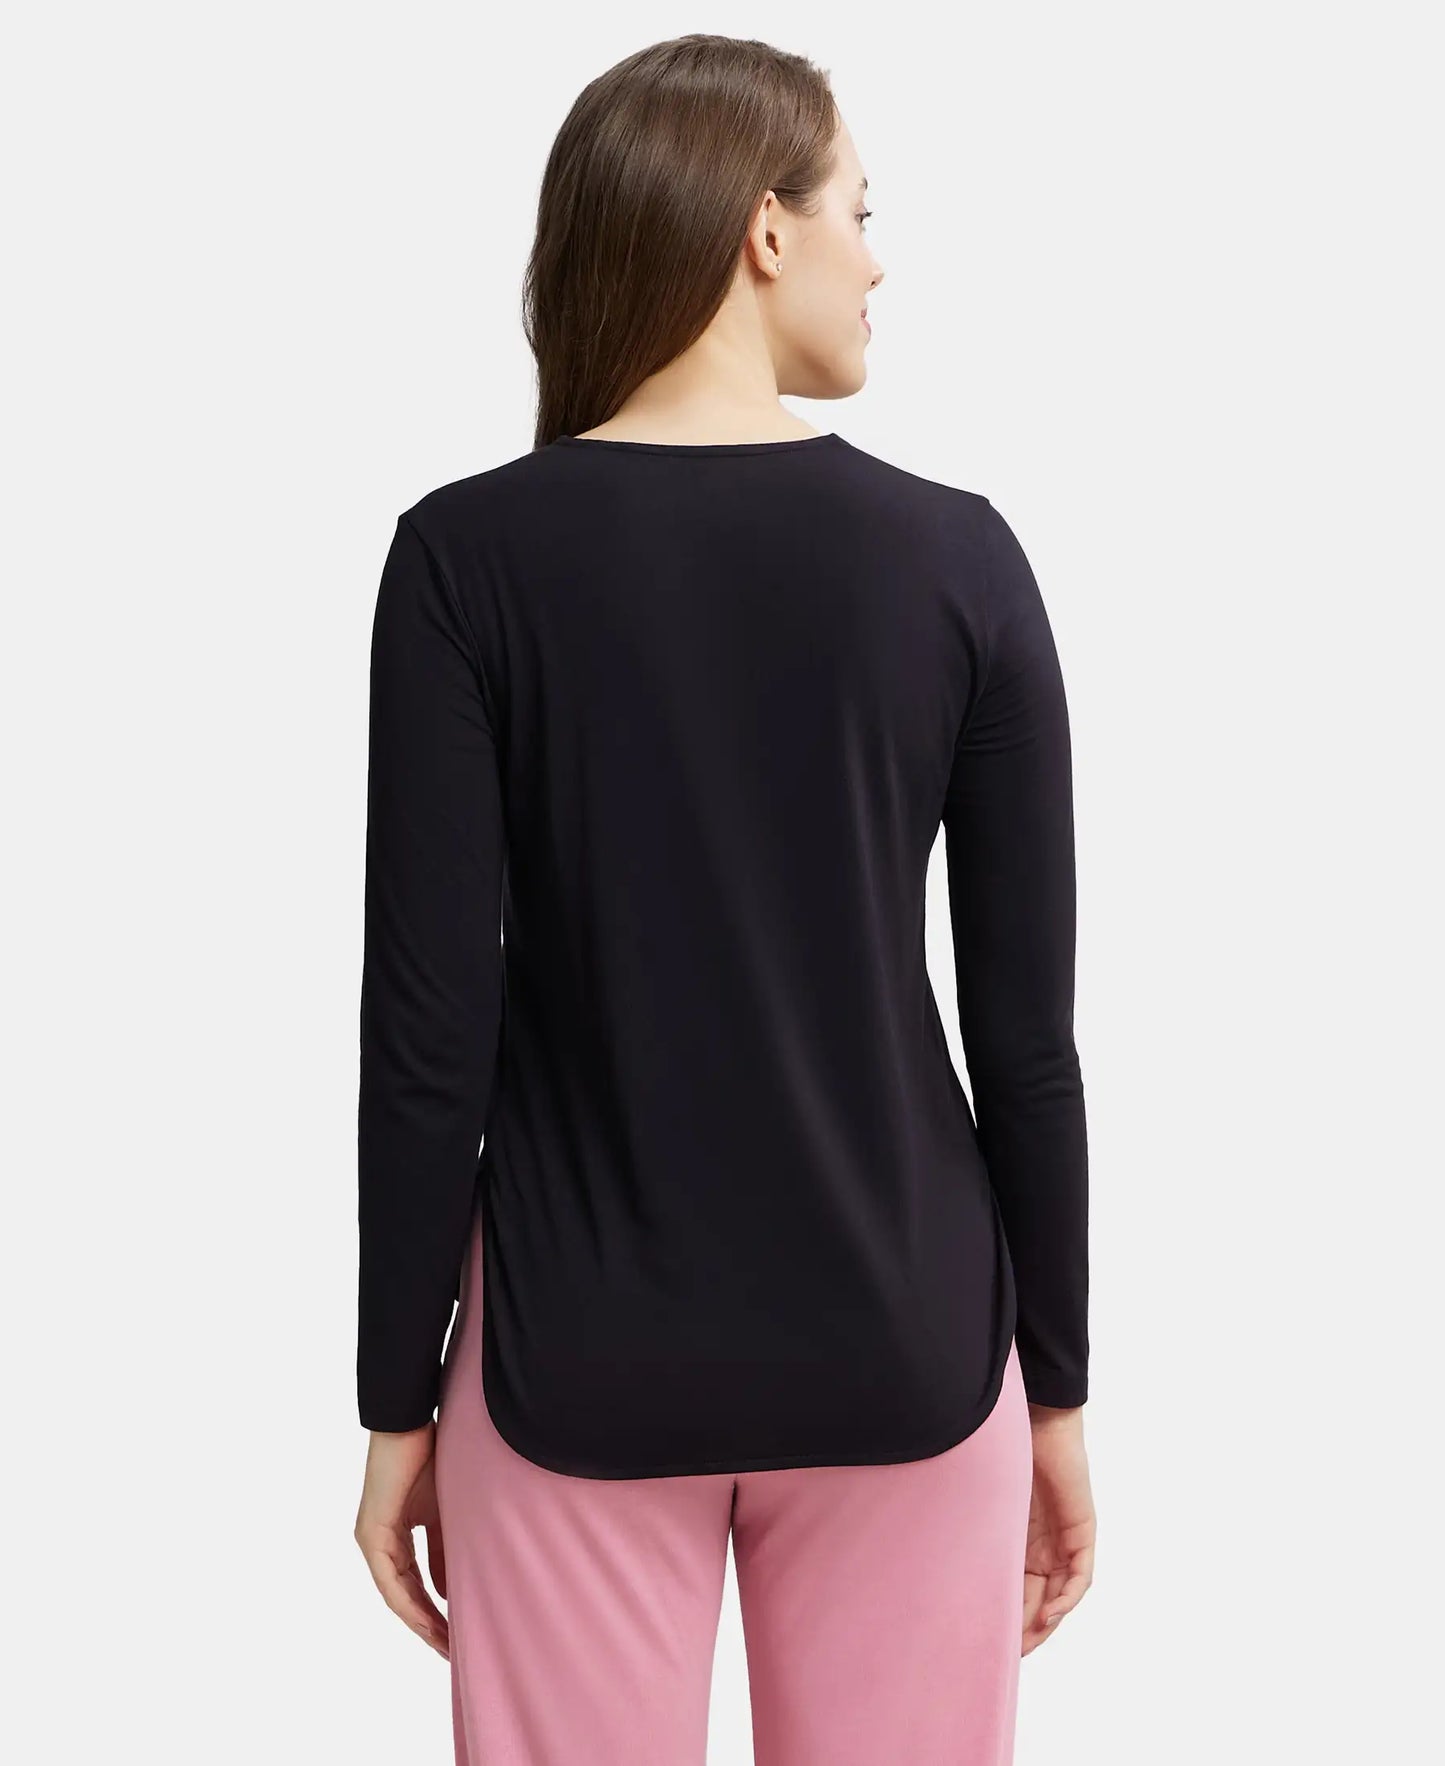 Micro Modal Cotton Relaxed Fit Solid Round Neck Full Sleeve T-Shirt with Curved Hem Styling - Black-3